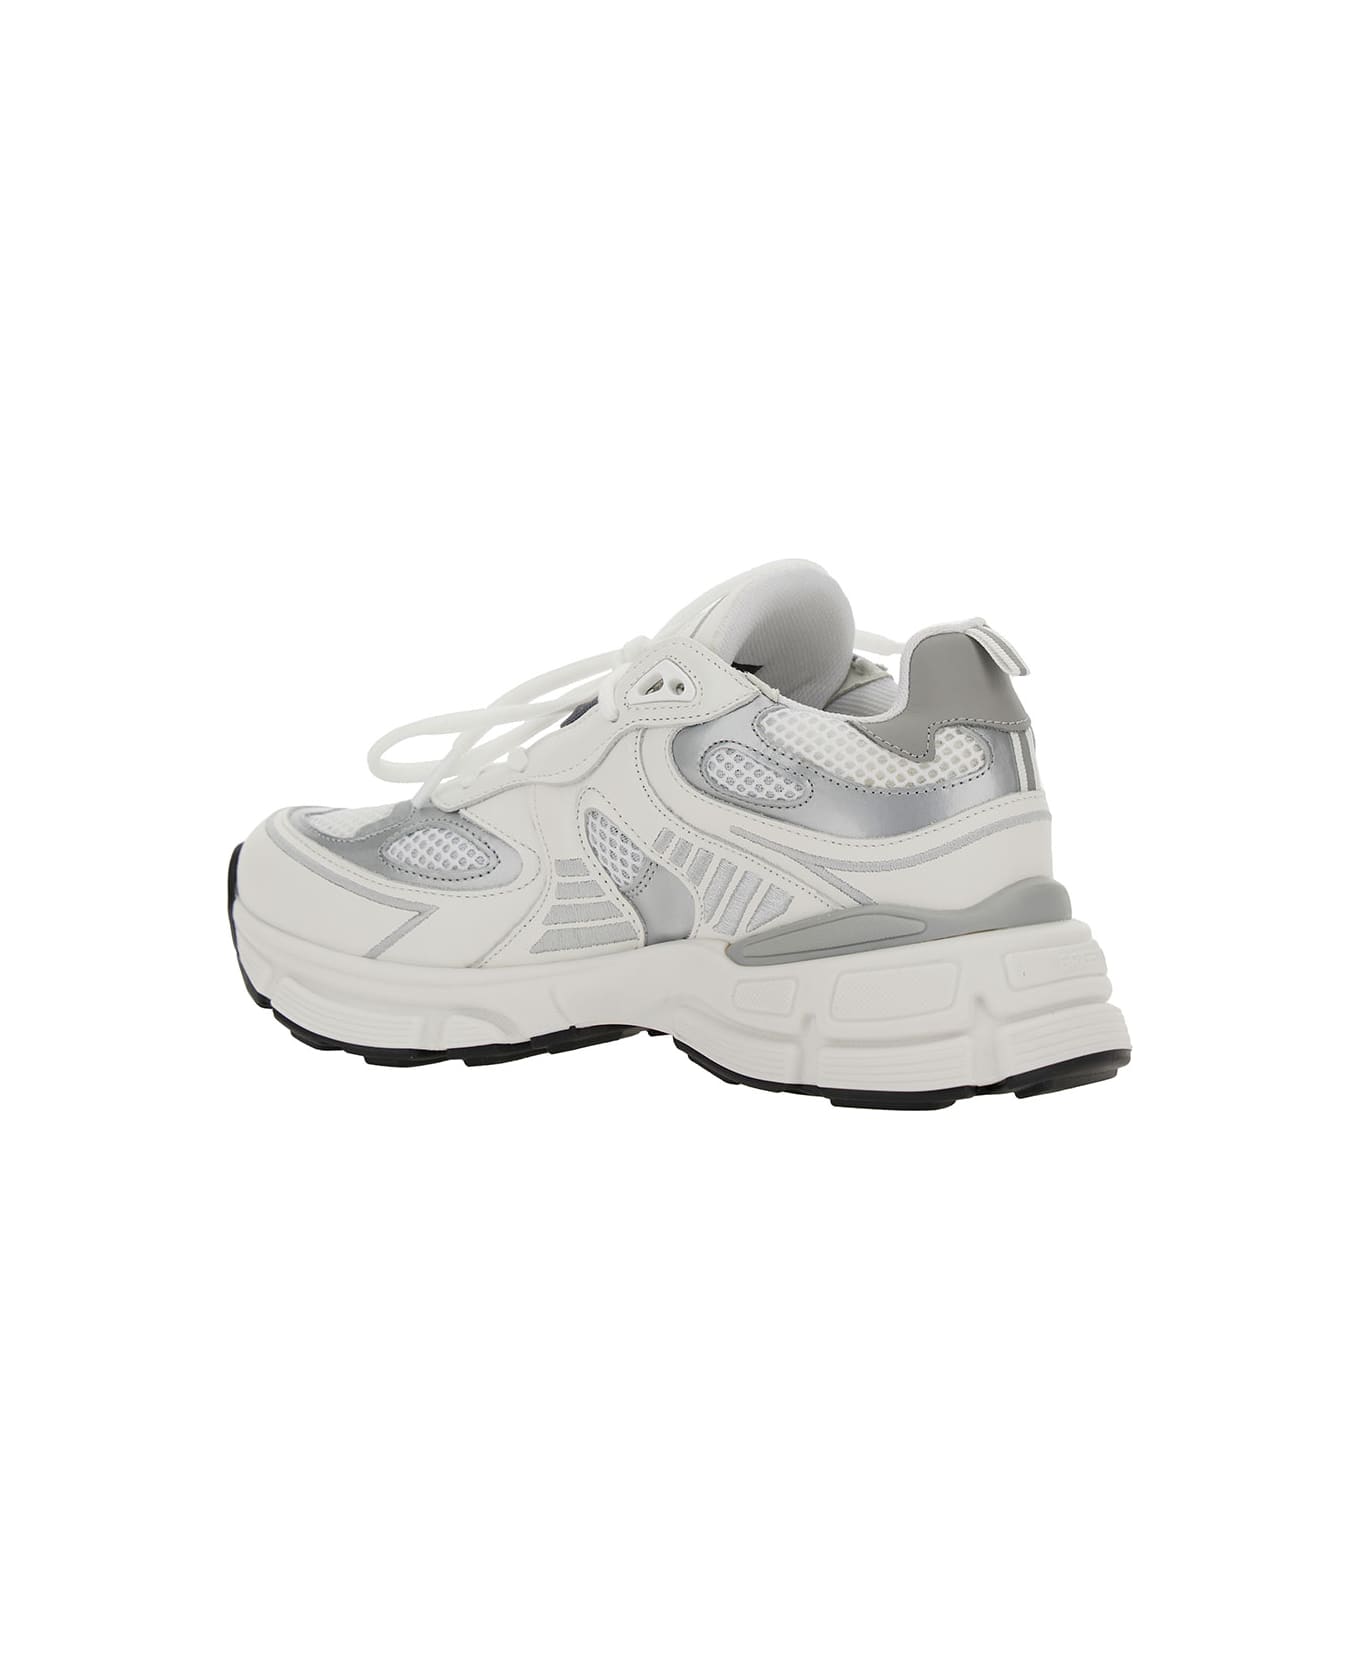 Axel Arigato 'marathon Ghost Runner' White Low Top Sneakers With Reflectivce Details In Leather Blend Woman - White